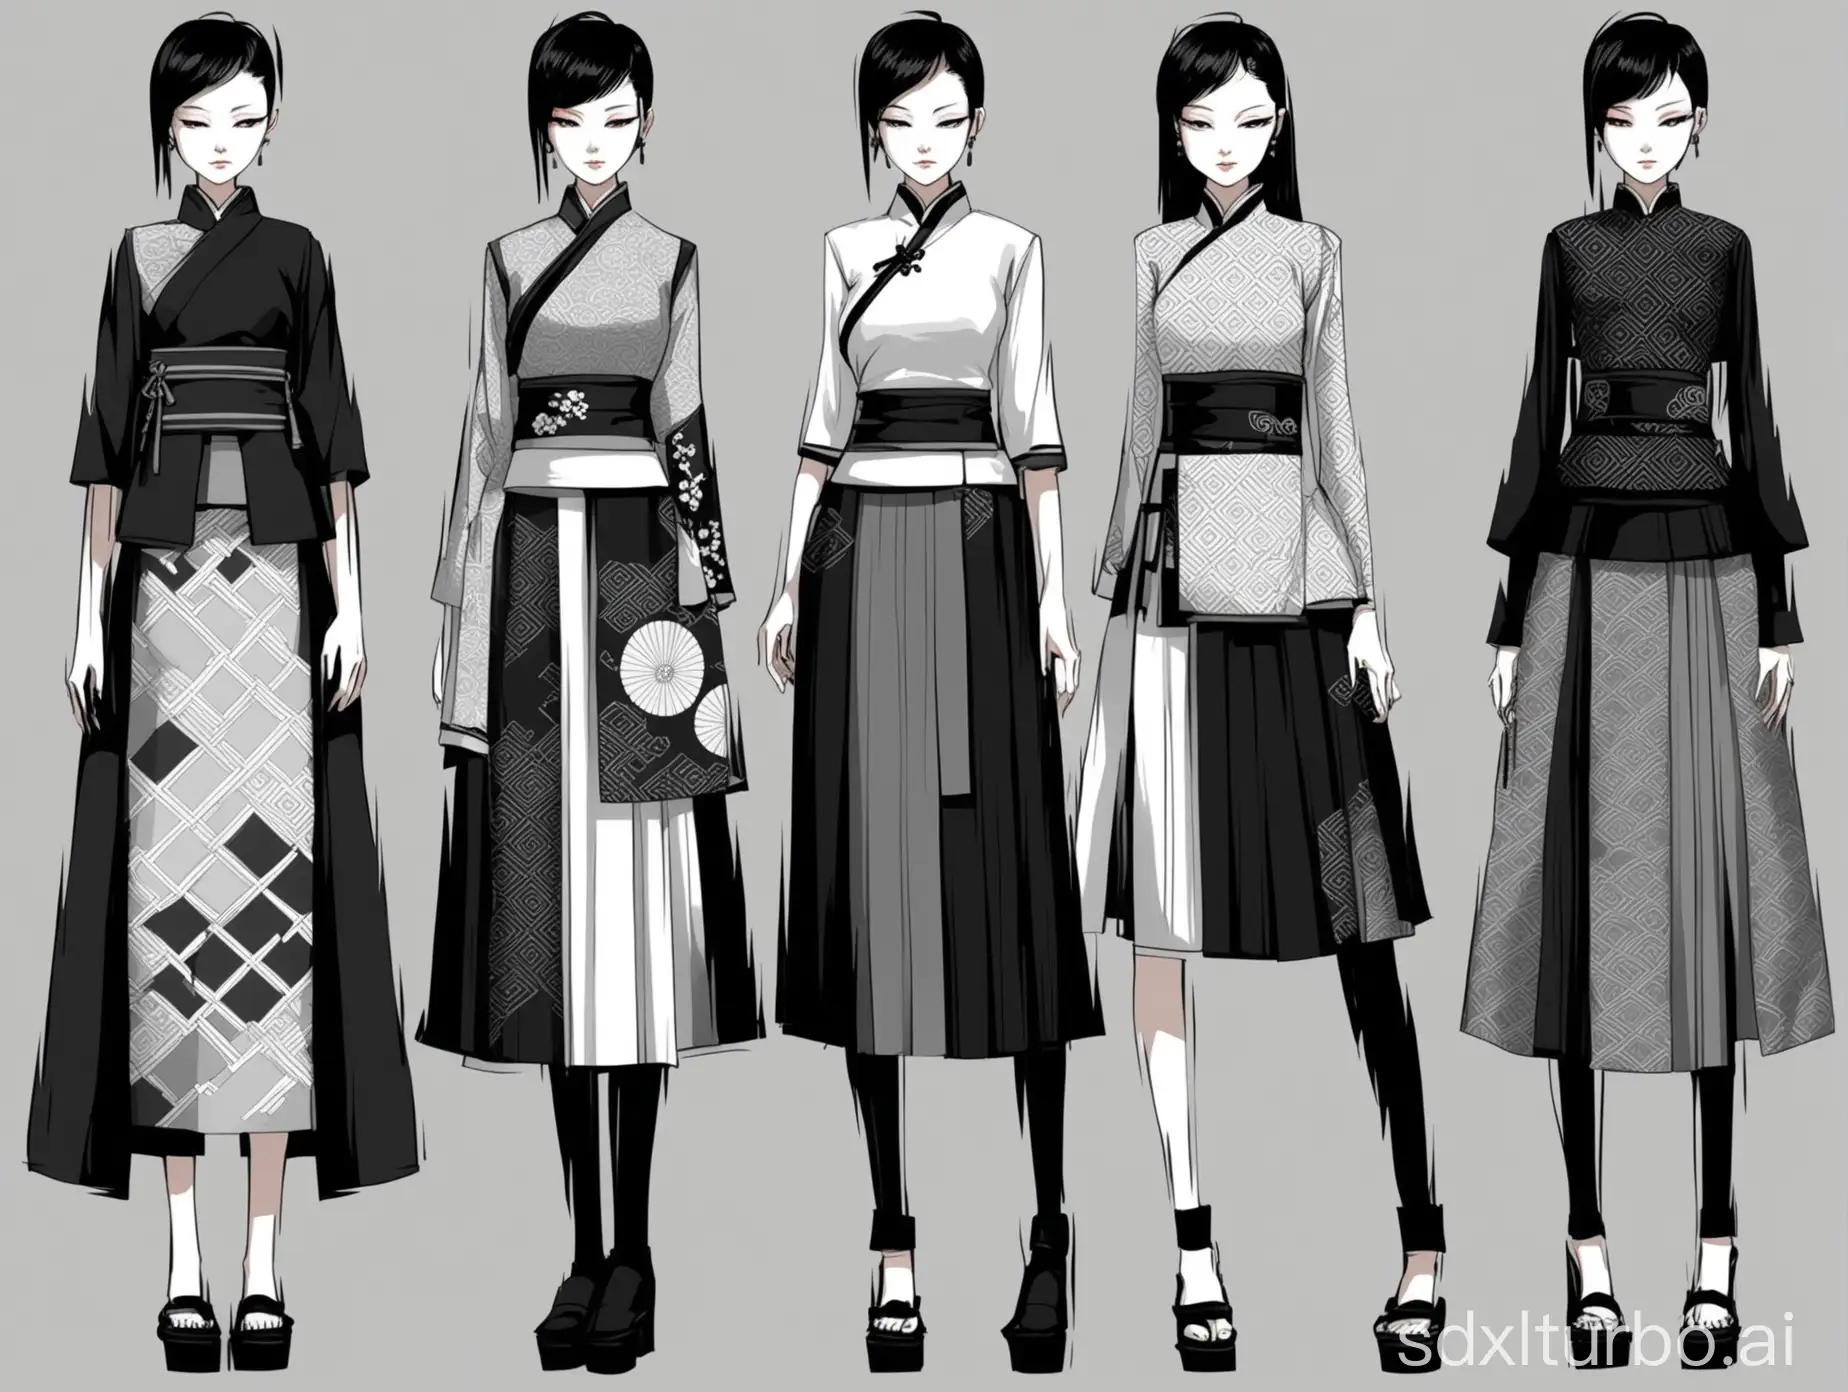 Generate for me a set of female clothing designs, skirts, new Sino style, black white and gray colors, with certain Chinese traditional patterns, fashionable modern styling, layered coordination, avant-garde design, Japanese style, dark style